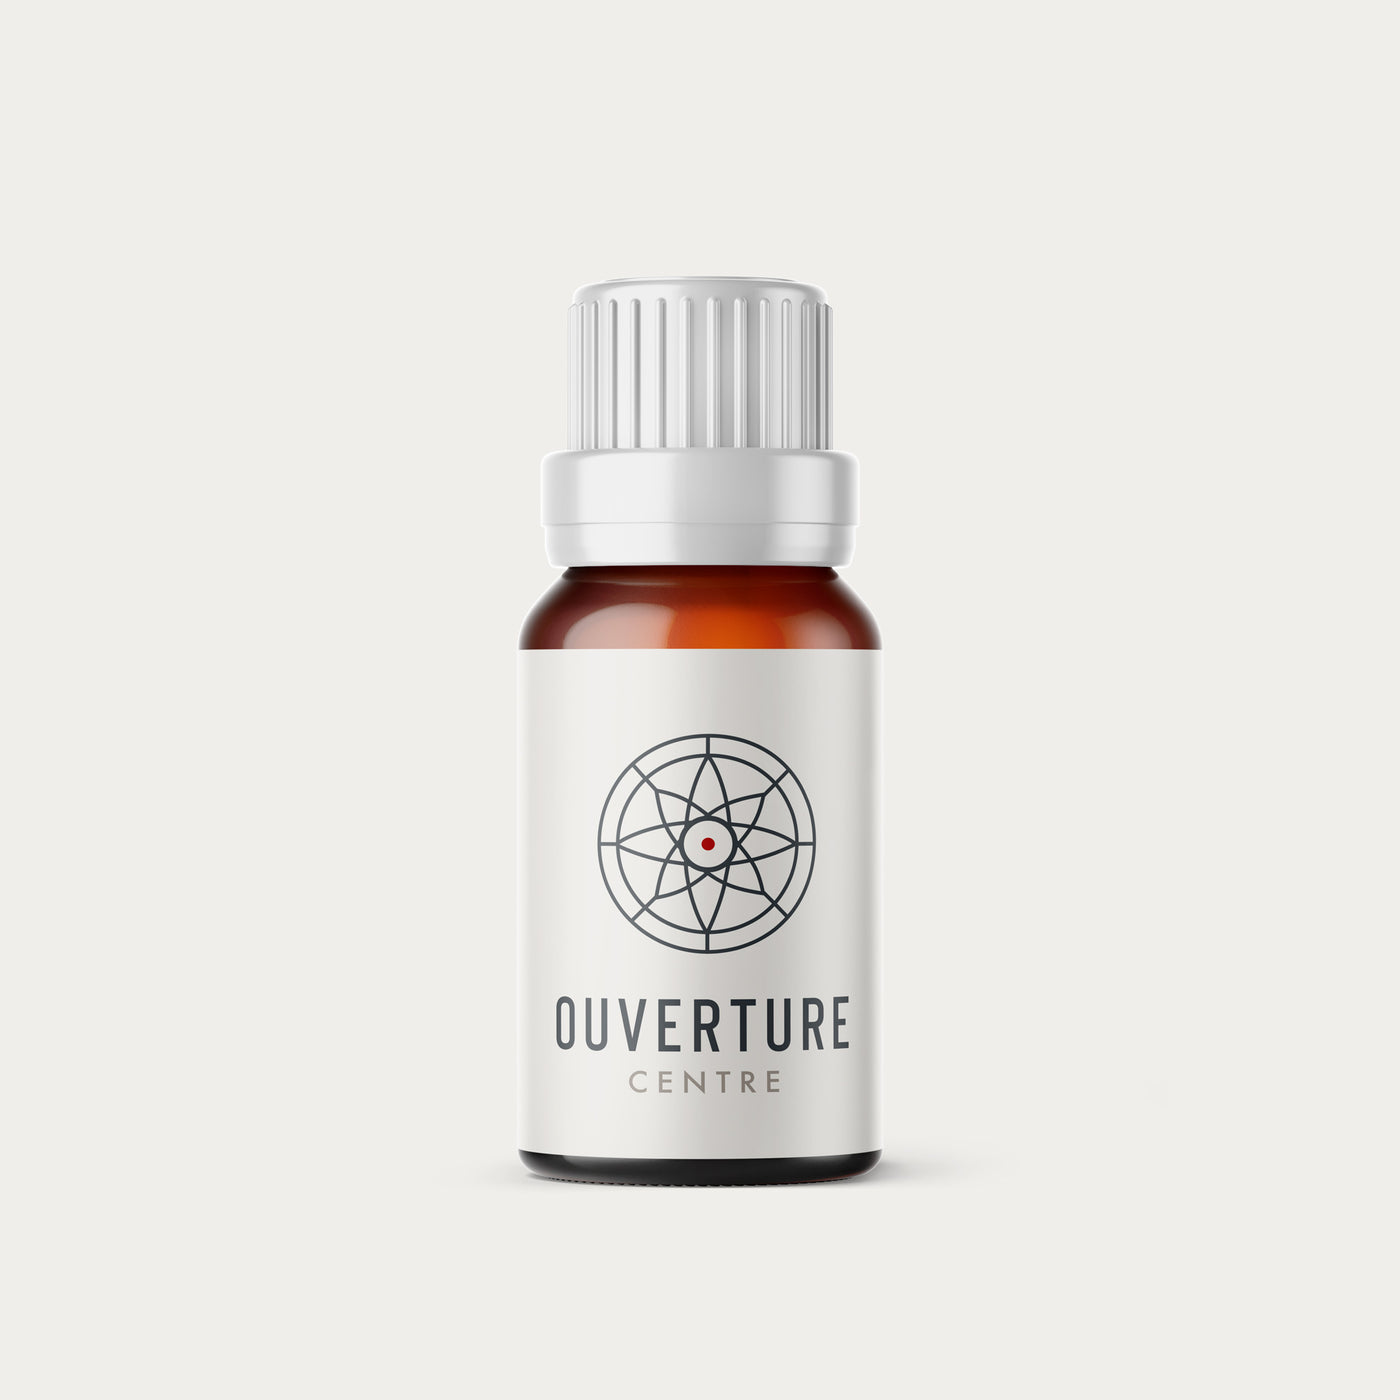 Ouverture - Synergie aromatique 100% pure